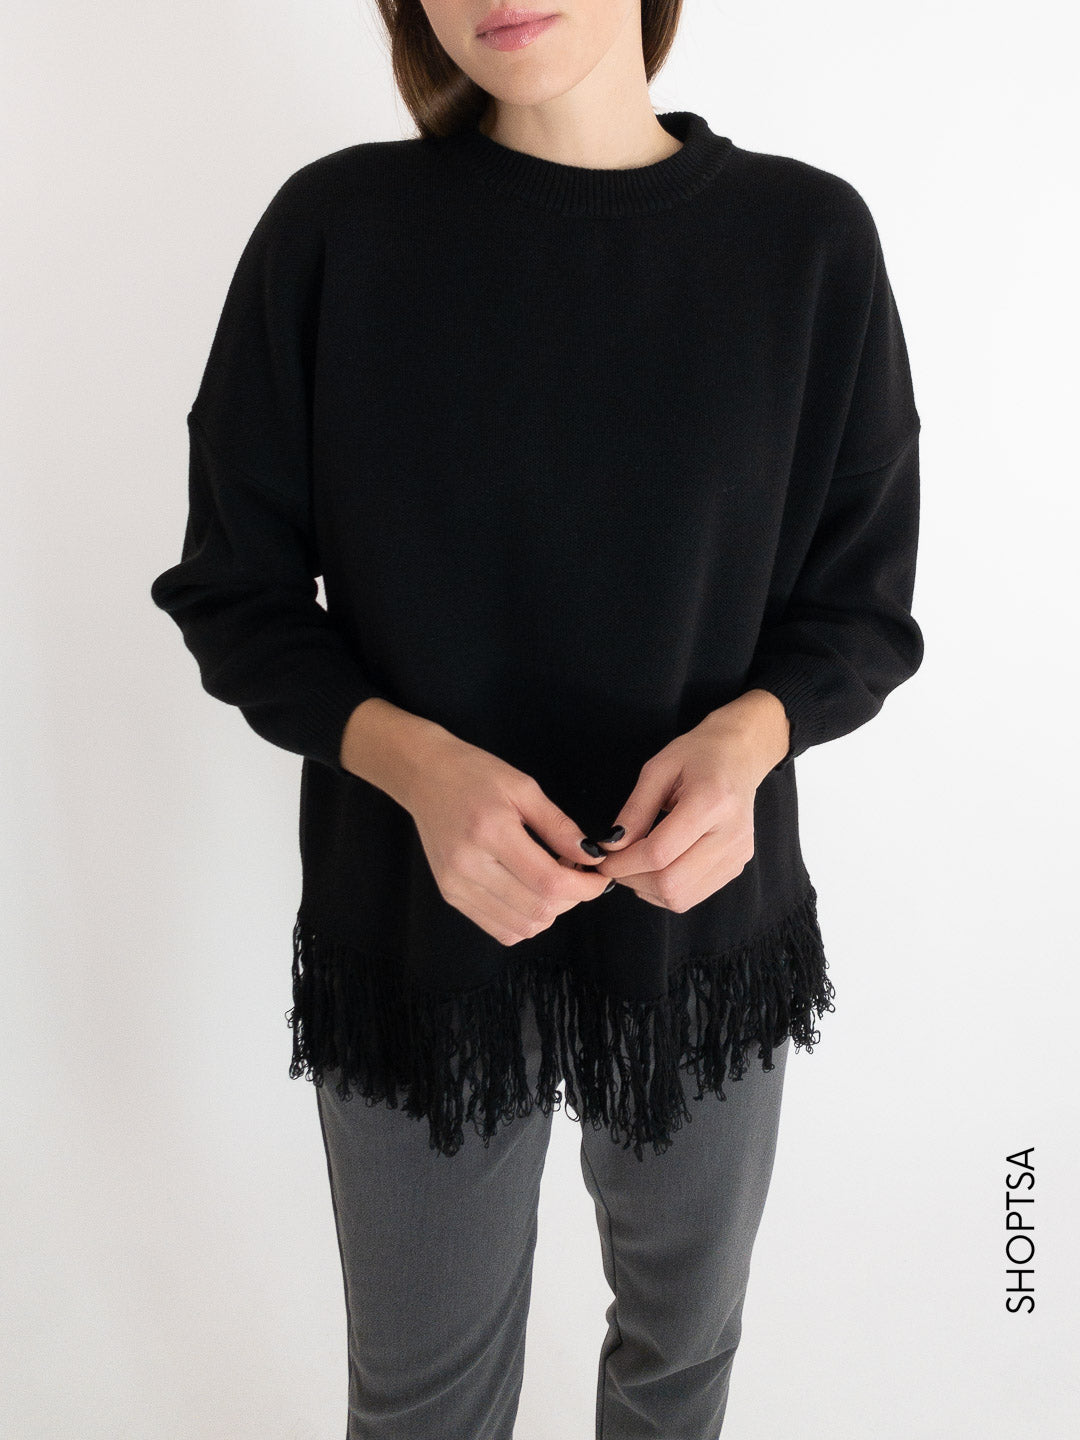 Over fringed sweater - GAMS'S